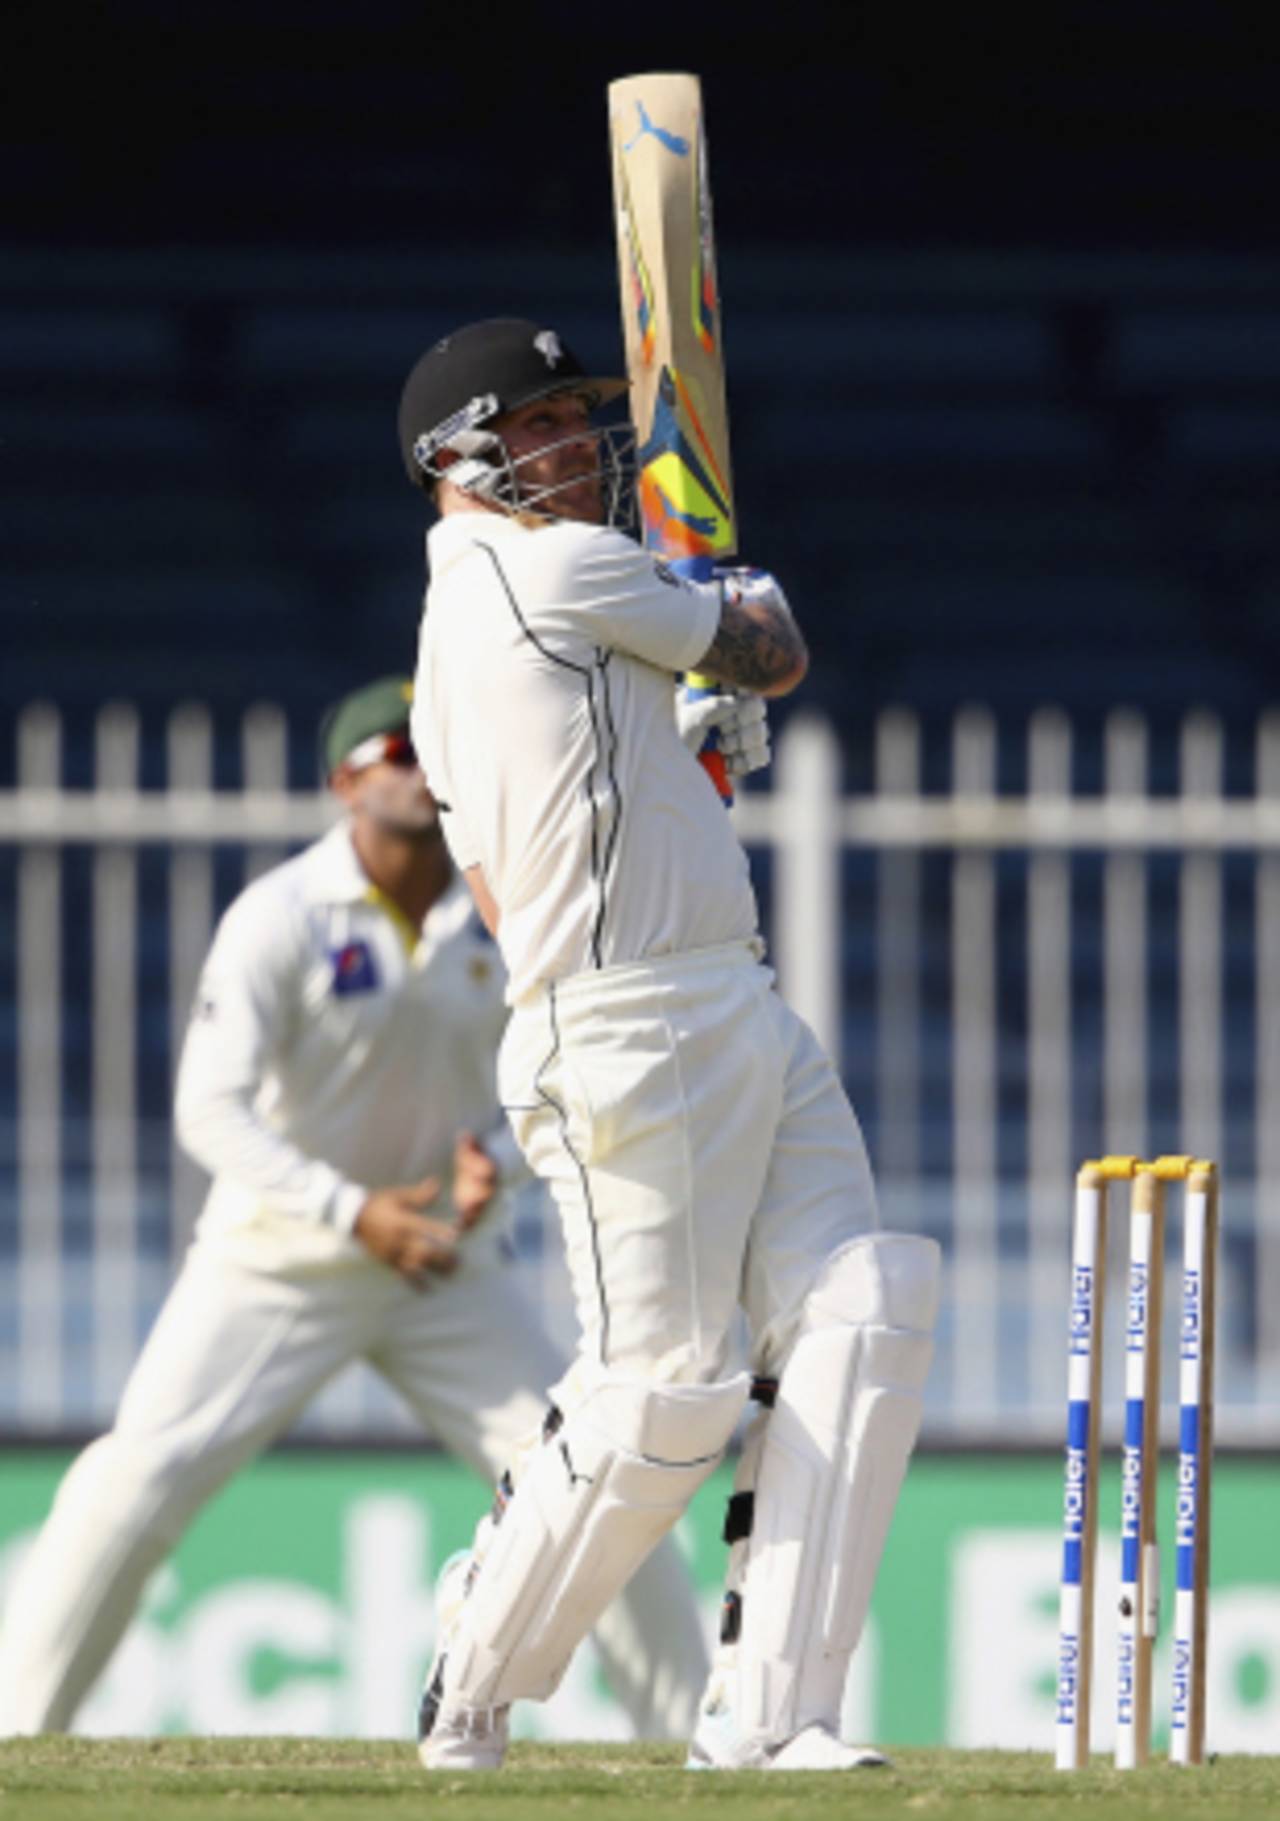 Brendon McCullum's Sharjah double had 11 sixes, just one short of the record&nbsp;&nbsp;&bull;&nbsp;&nbsp;Getty Images